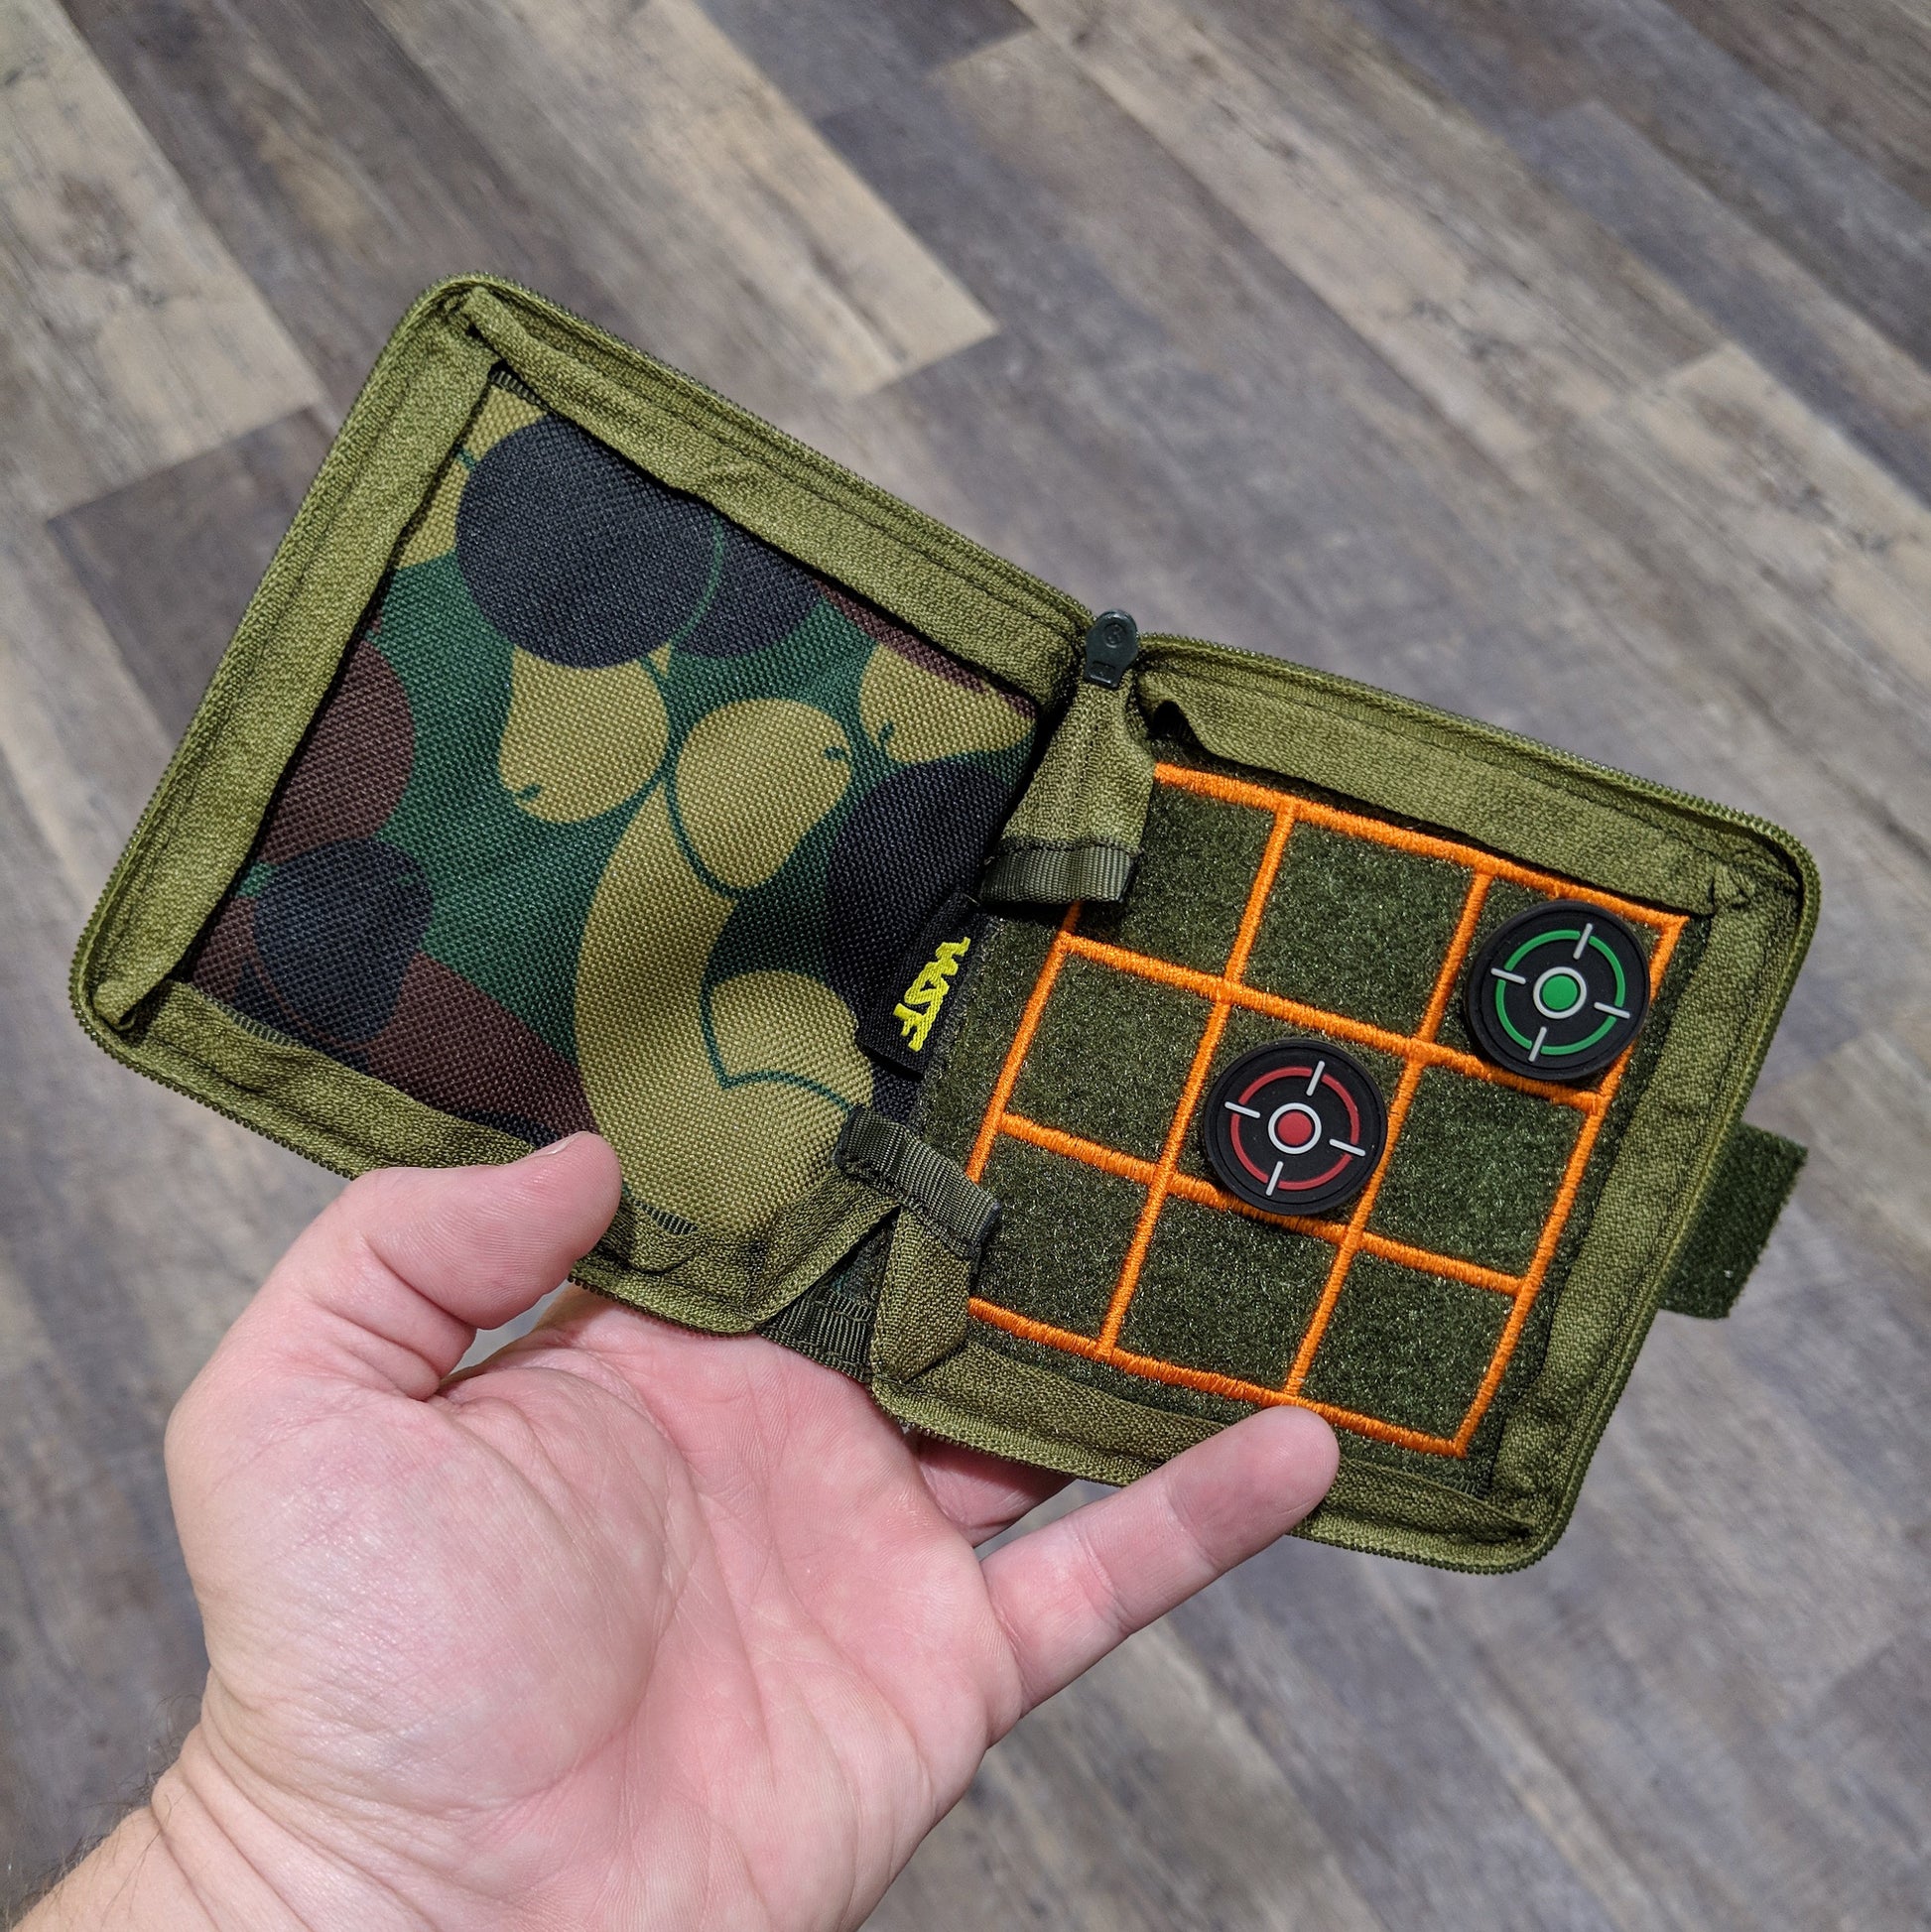 Tic Tactical Toe - Pocket Game - 4"x4" - with Reticle patches